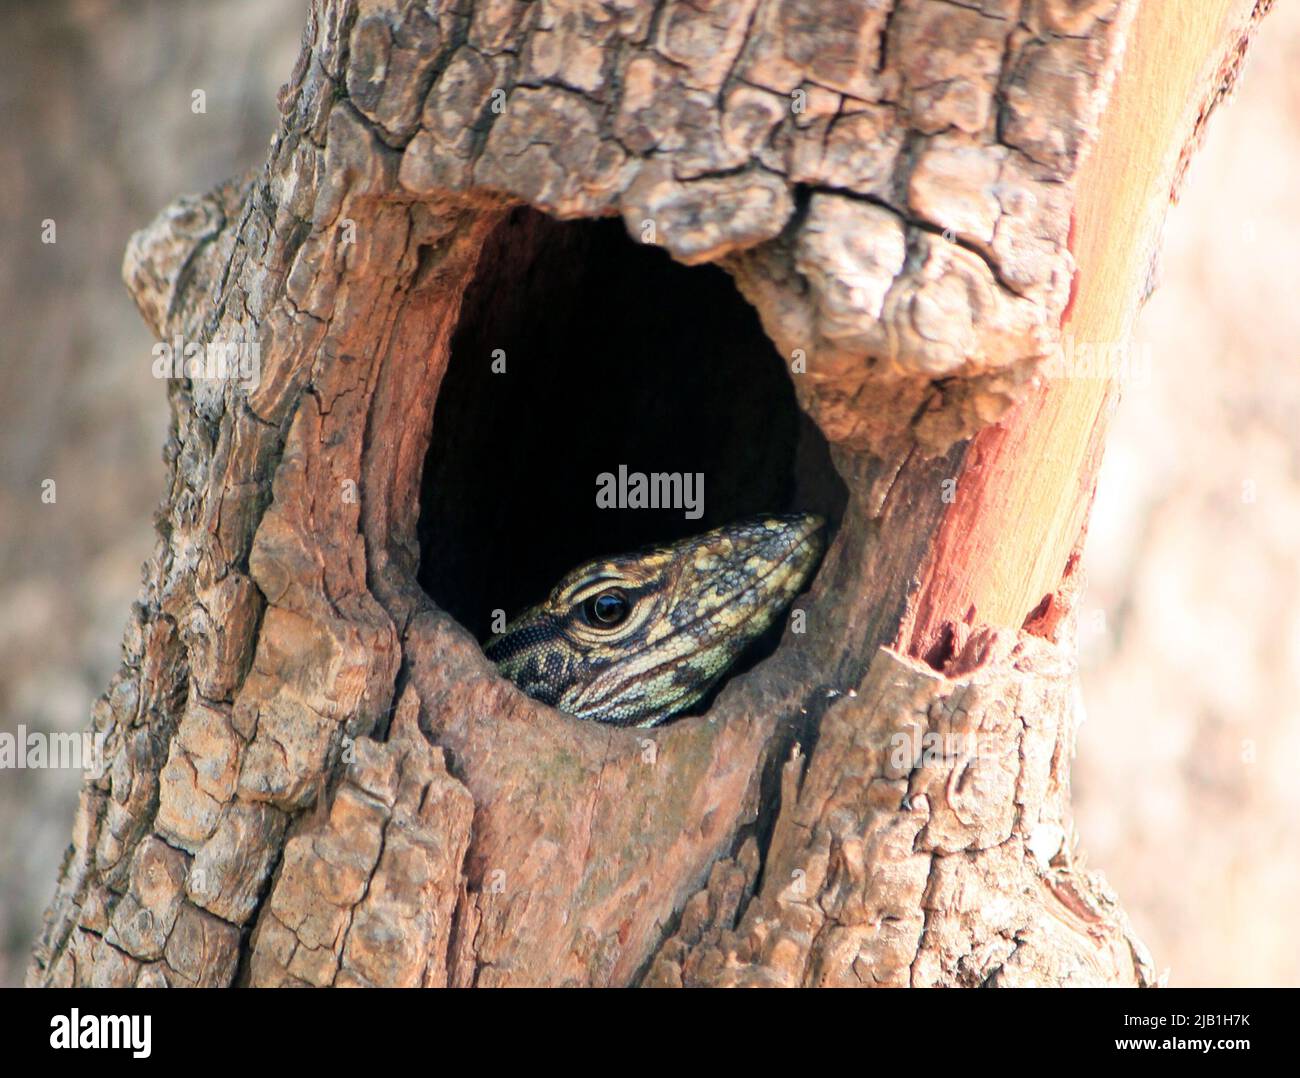 The photo was taken during a wildlife safari in Yala National Park in Sri Lanka as this amazing creature was peaking through a hole in a tree Stock Photo